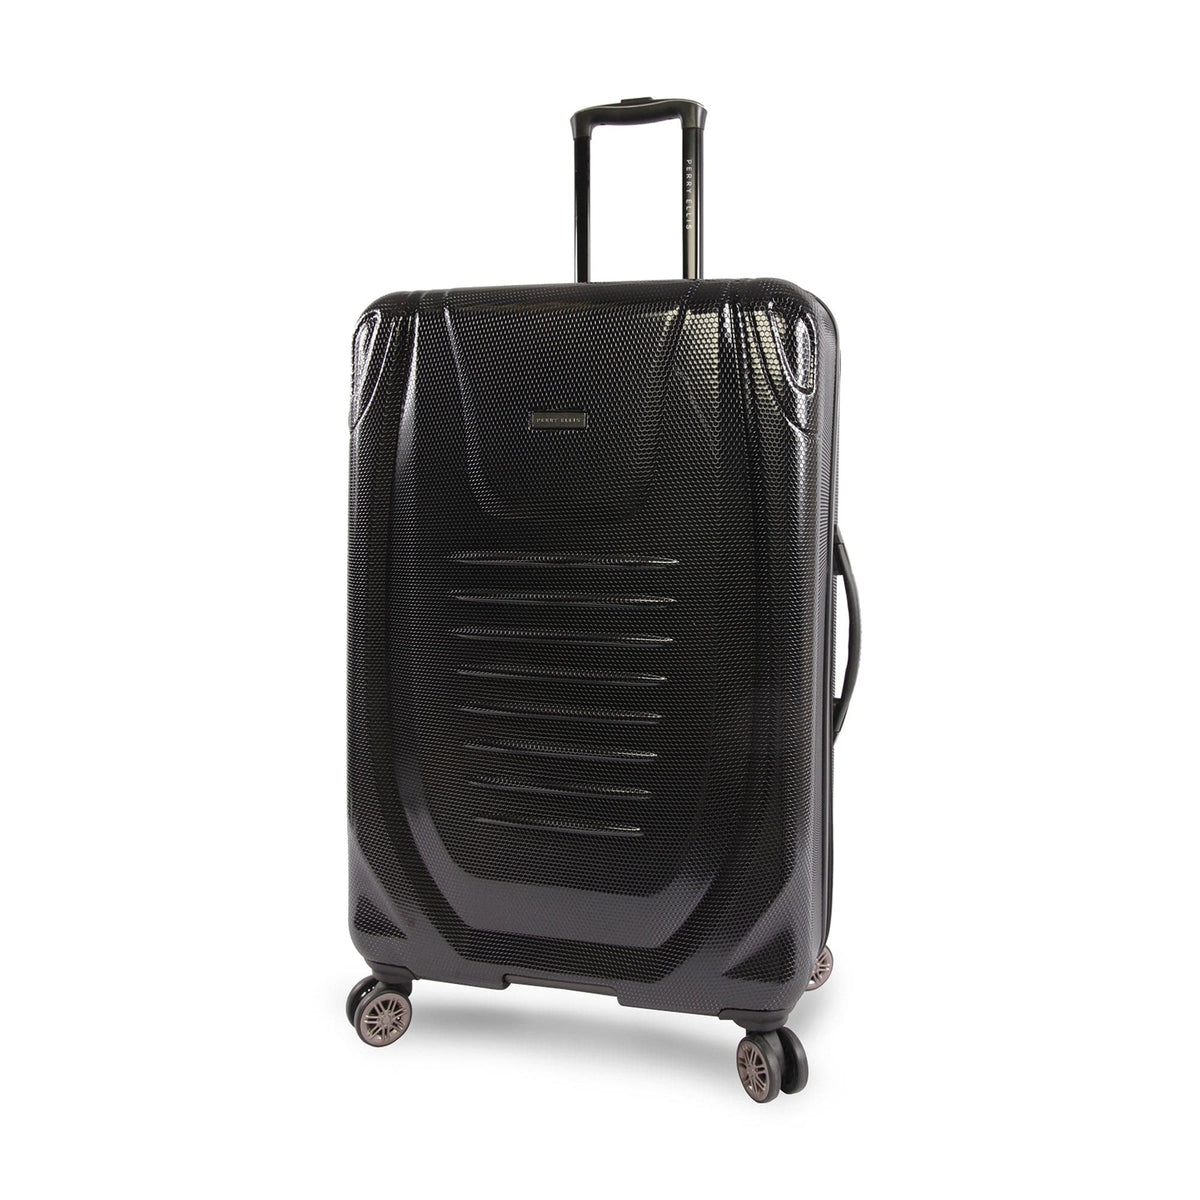 Perry Ellis Bauer 29" Hardside Checked Spinner Luggage